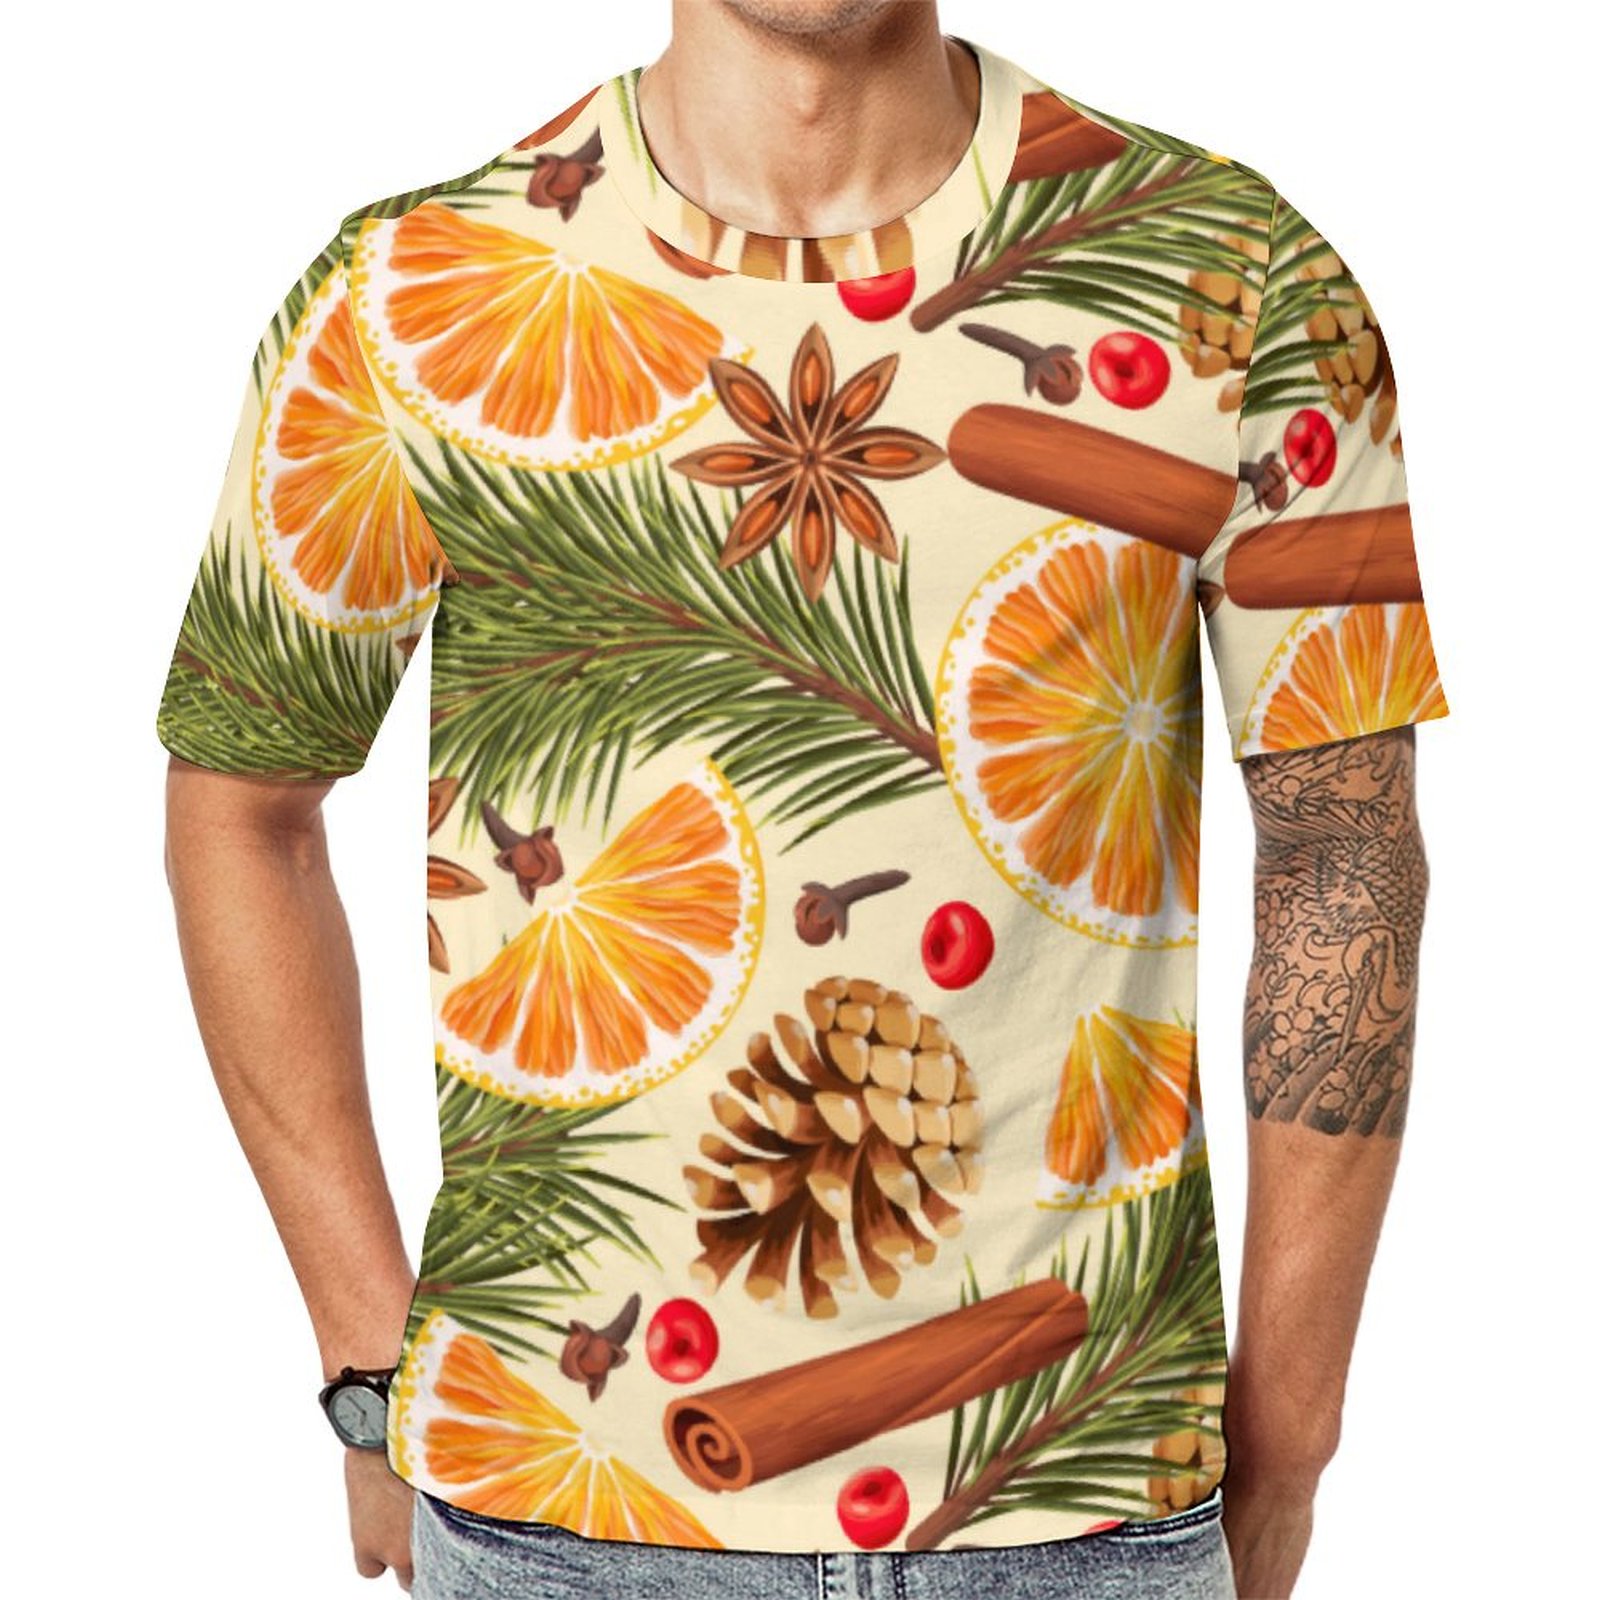 Merry Christmas Citrus And Spice Short Sleeve Print Unisex Tshirt Summer Casual Tees for Men and Women Coolcoshirts